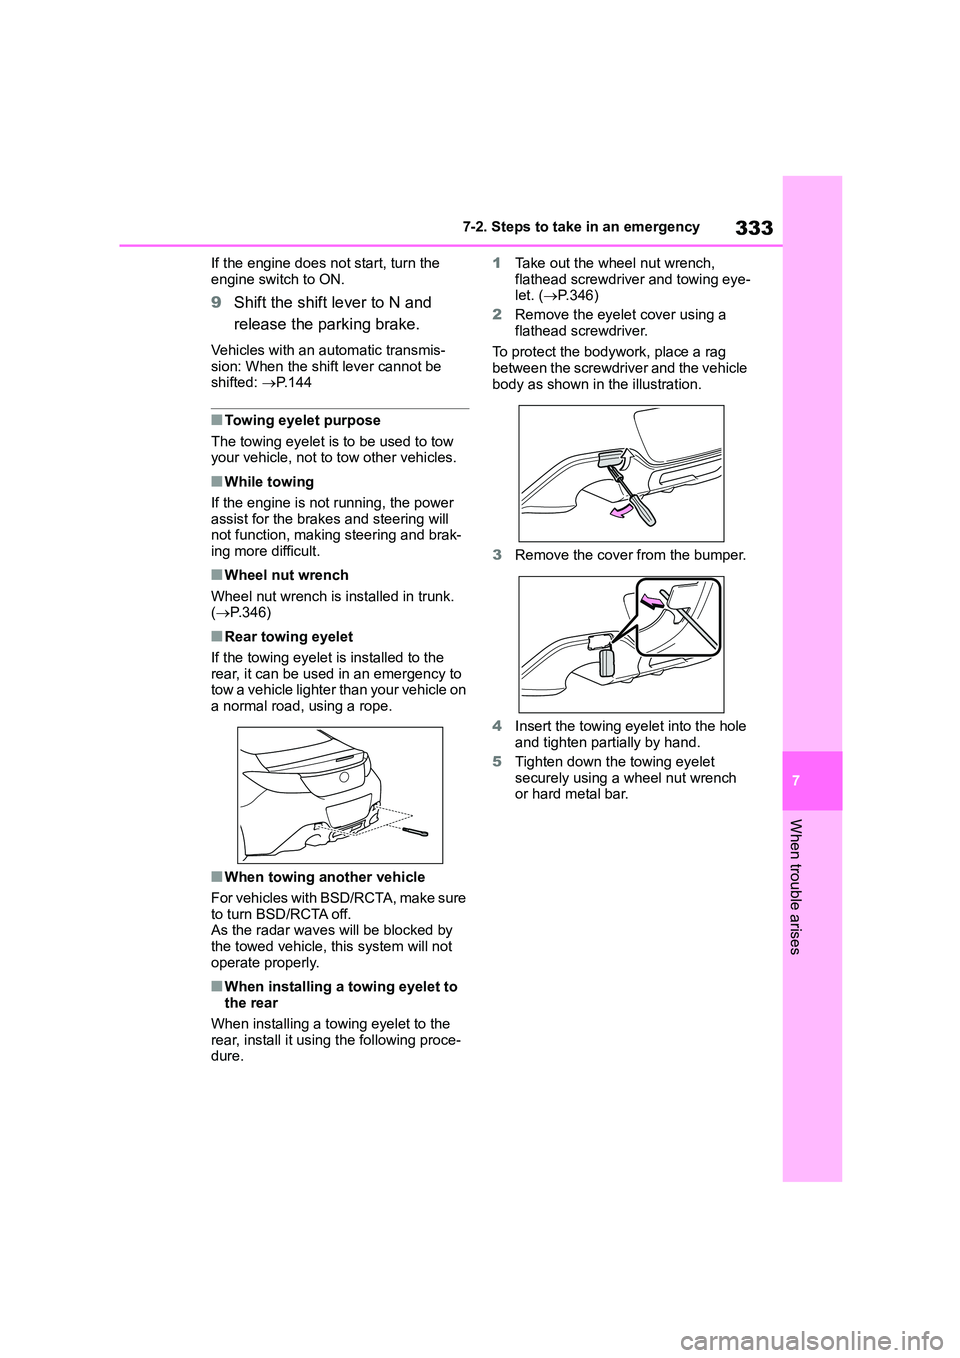 TOYOTA GR86 2022  Owners Manual (in English) 333
7 
7-2. Steps to take in an emergency
When trouble arises
If the engine does not start, turn the  
engine switch to ON.
9 Shift the shift lever to N and  
release the parking brake.
Vehicles with 